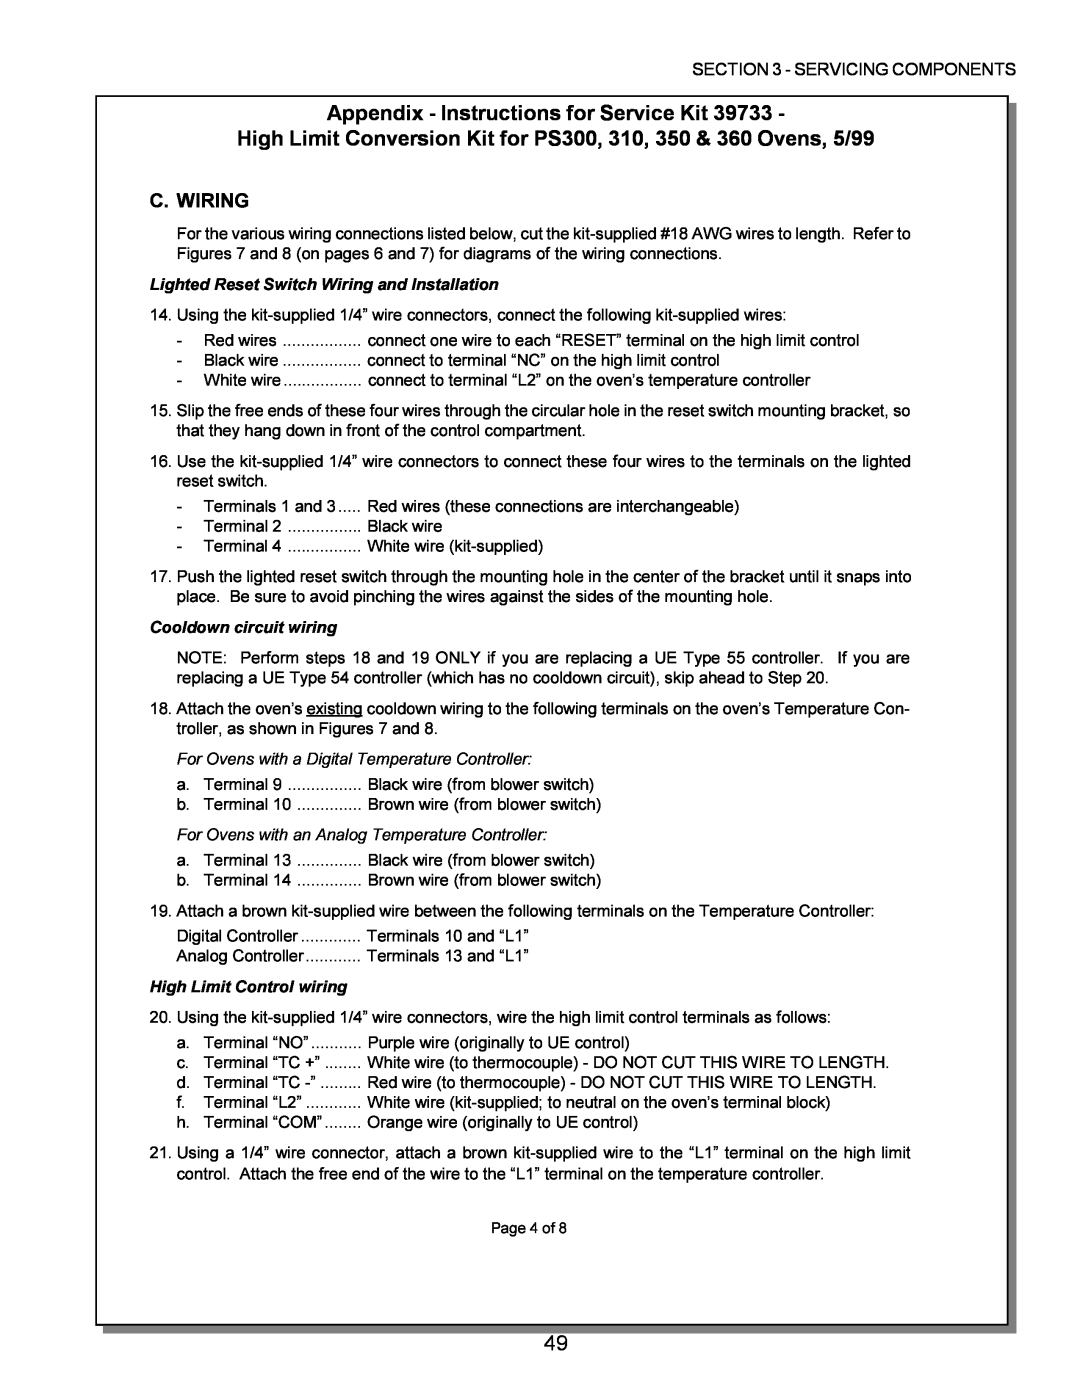 Middleby Marshall PS200 Appendix - Instructions for Service Kit, C. Wiring, Lighted Reset Switch Wiring and Installation 